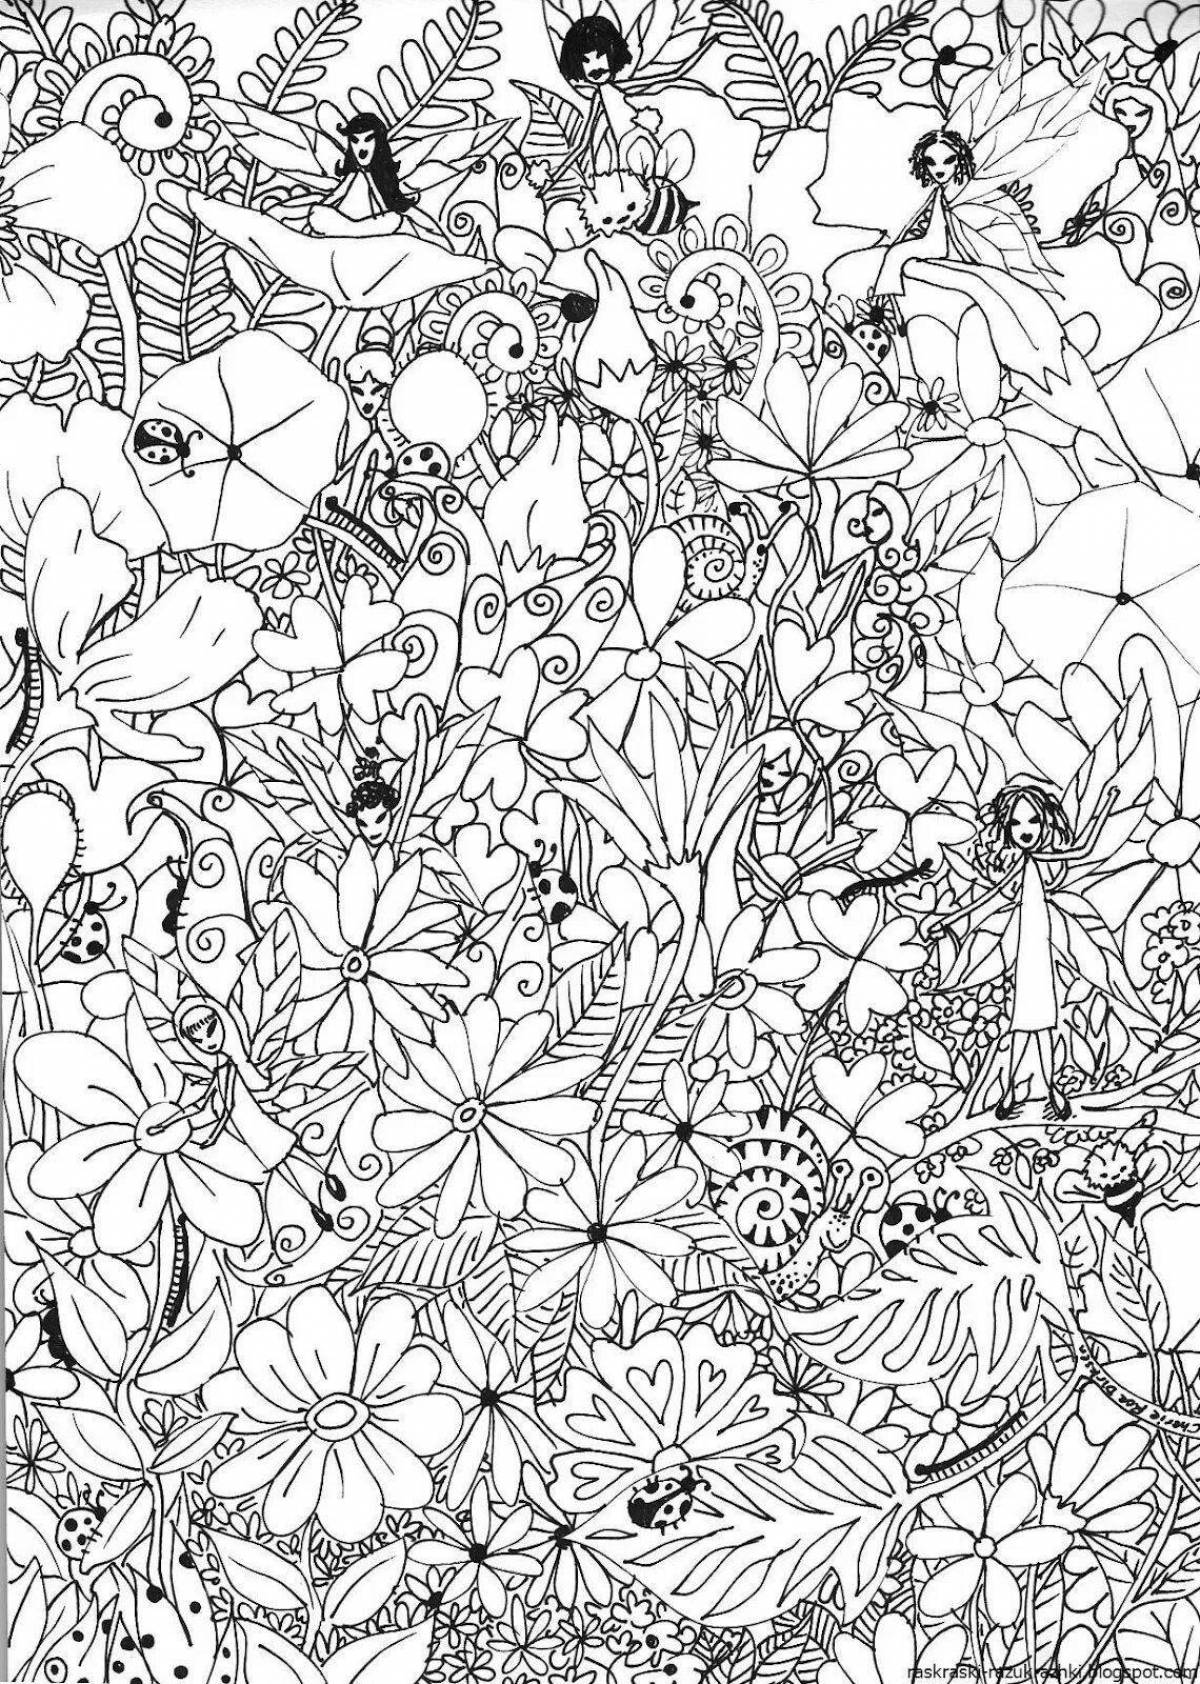 Creative coloring pages for adults